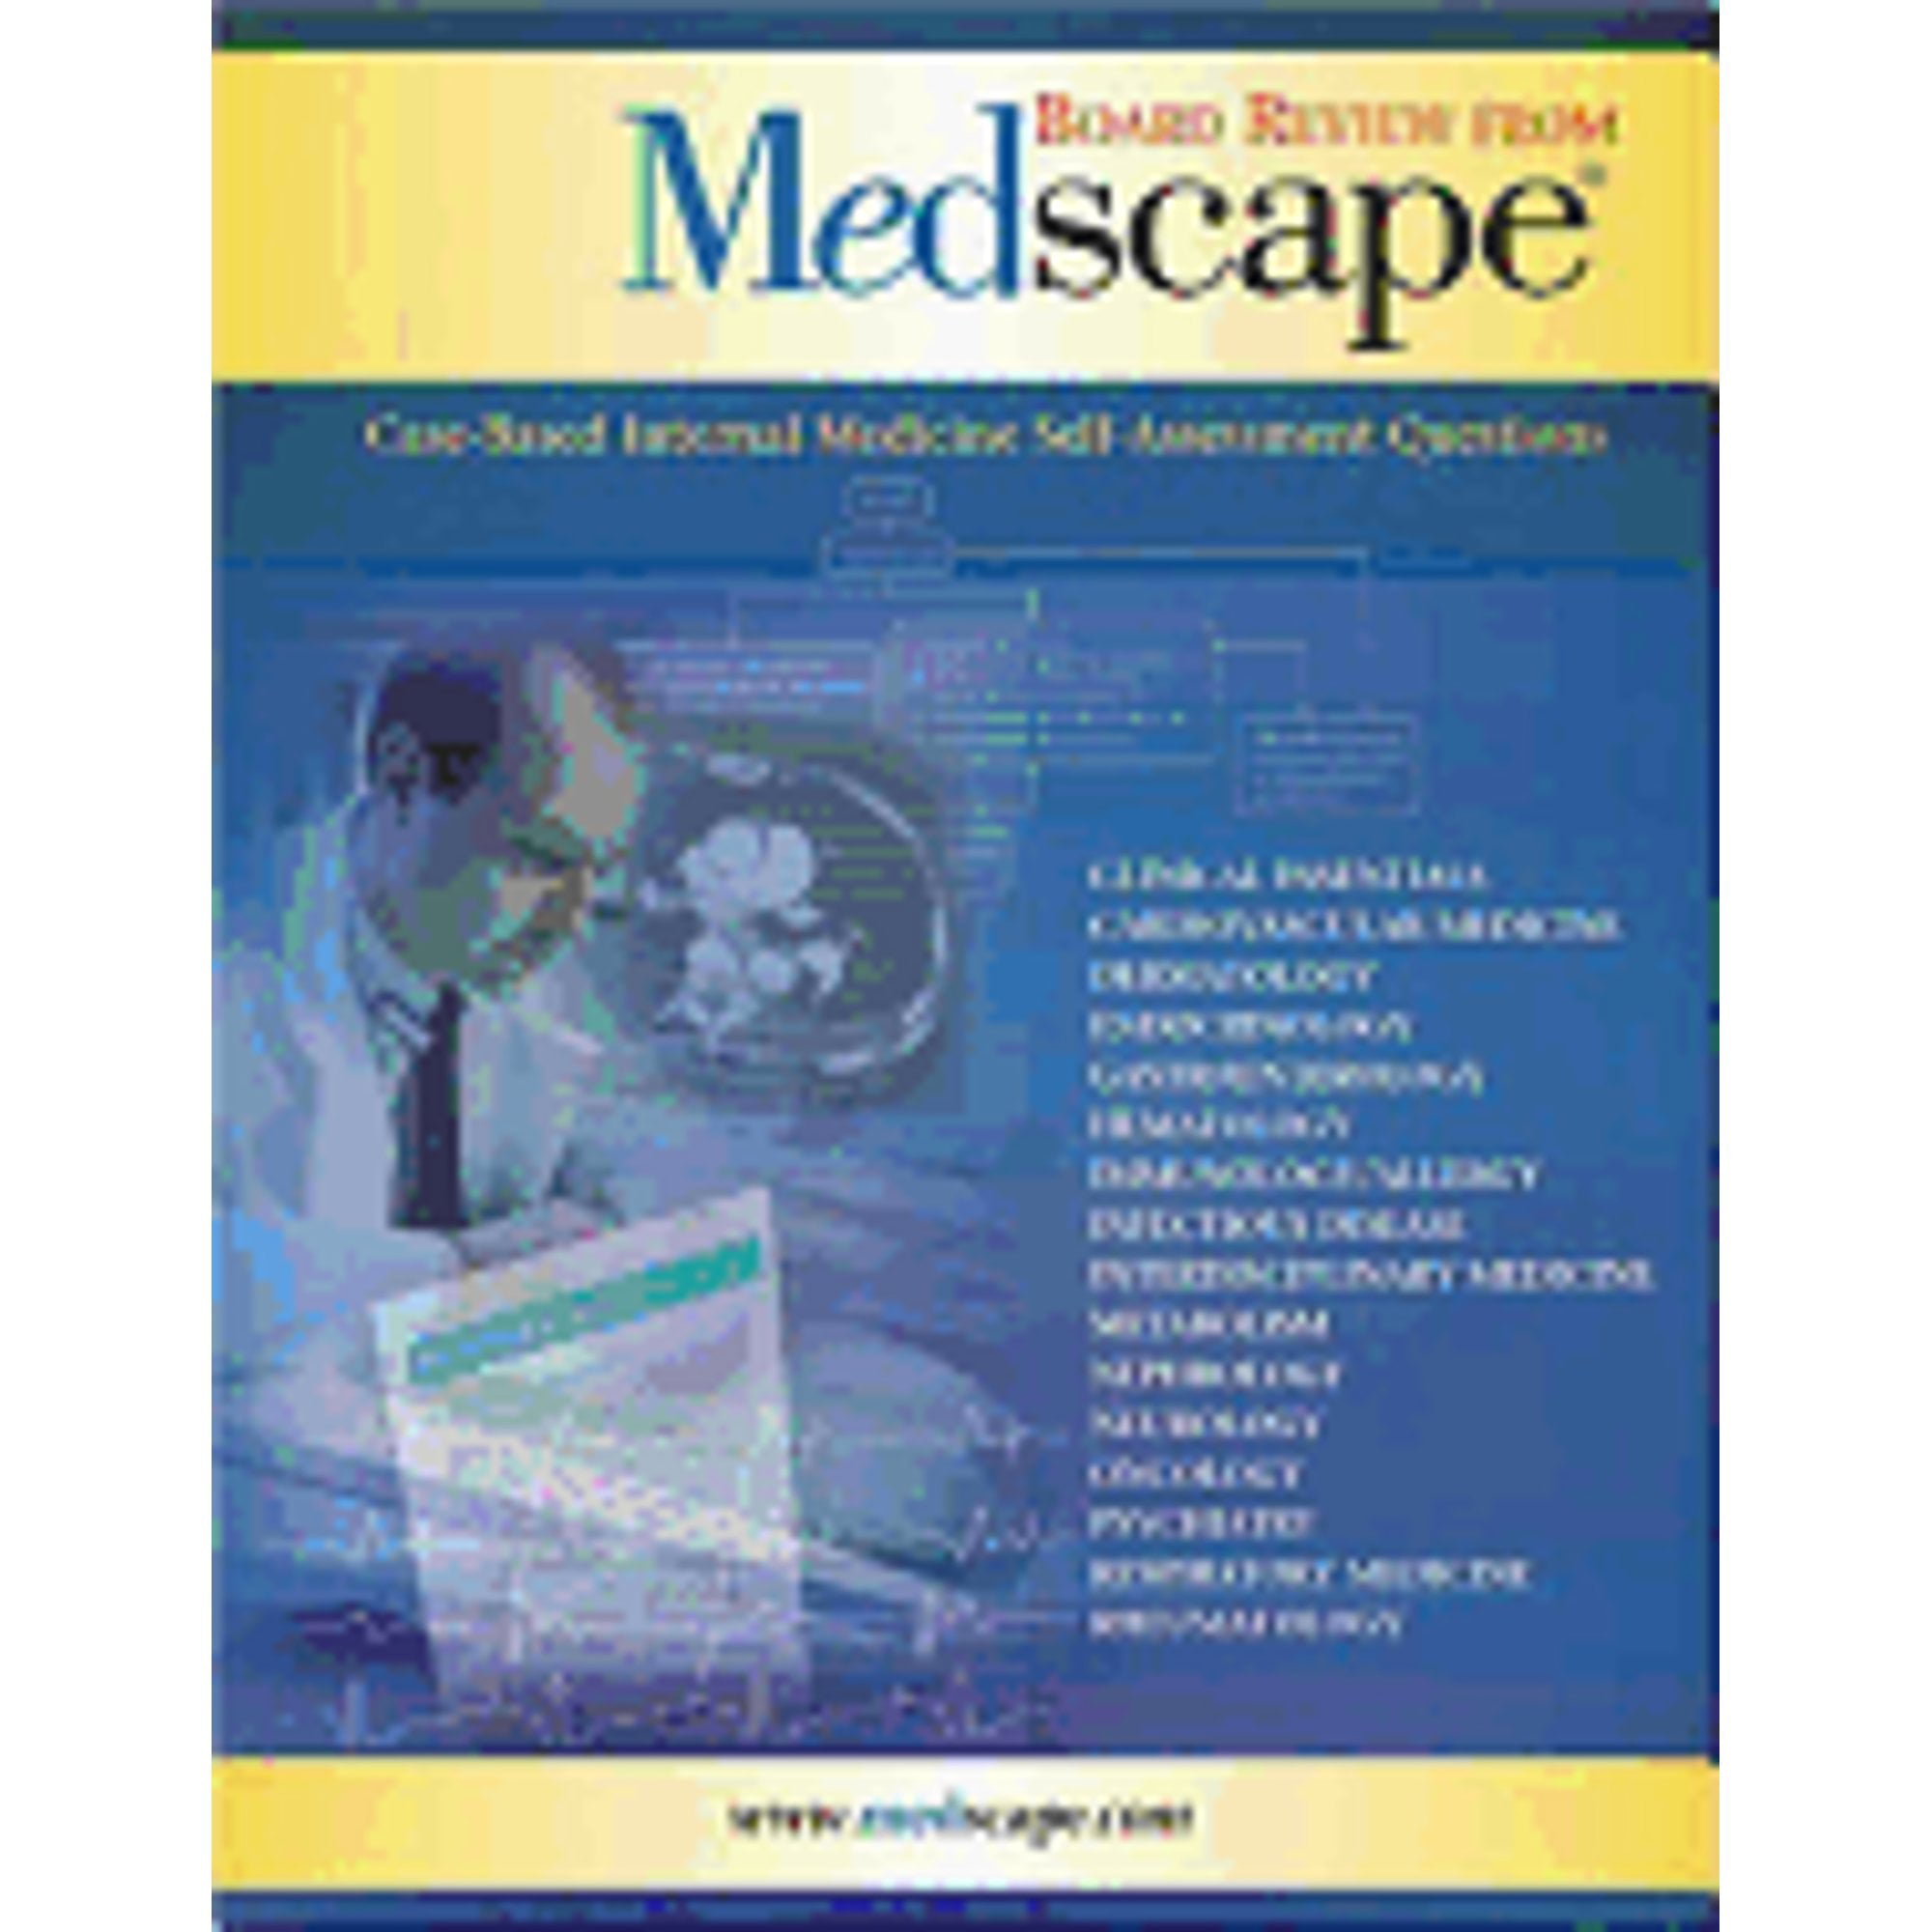 Pre-Owned Board Review from Medscape: Case-Based Internal Medicine Self-Assessment Questions (Paperback 9780974832784) by Medscape